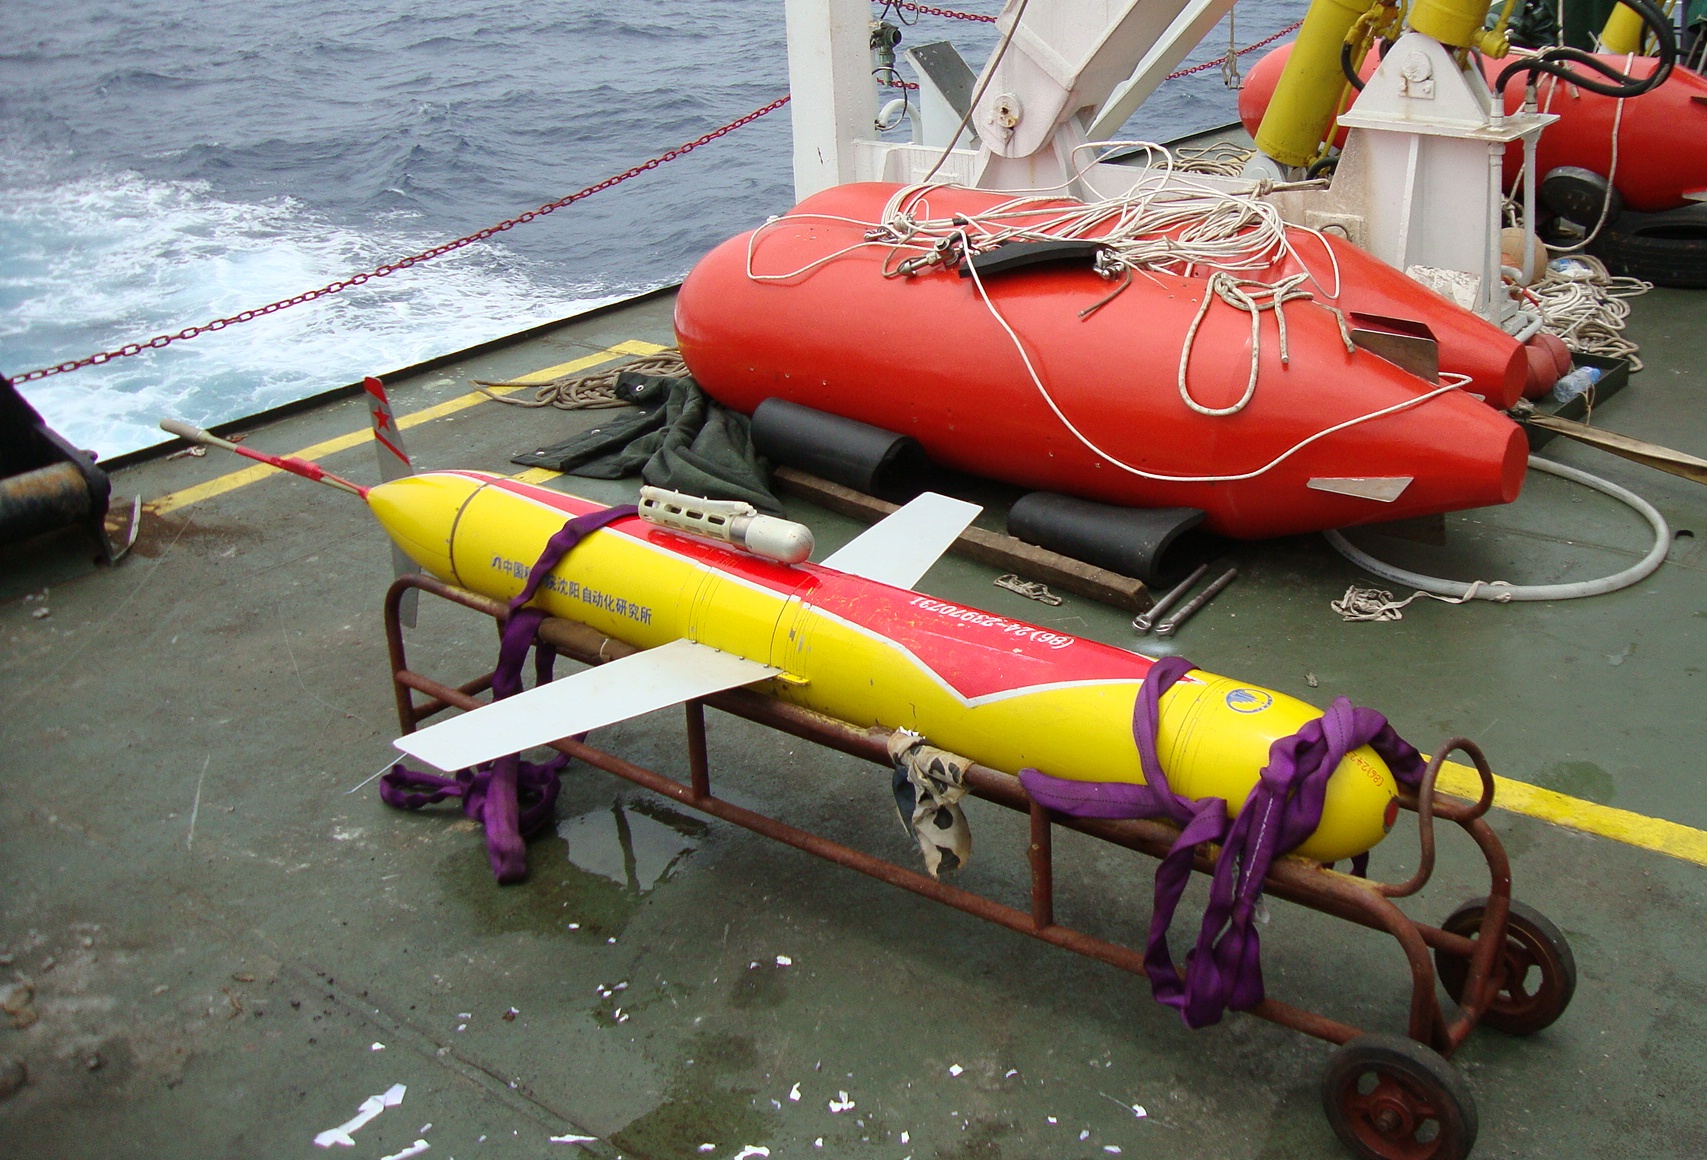 The Underwater Glider Developed By Sia Accomplishes Sea Test In South